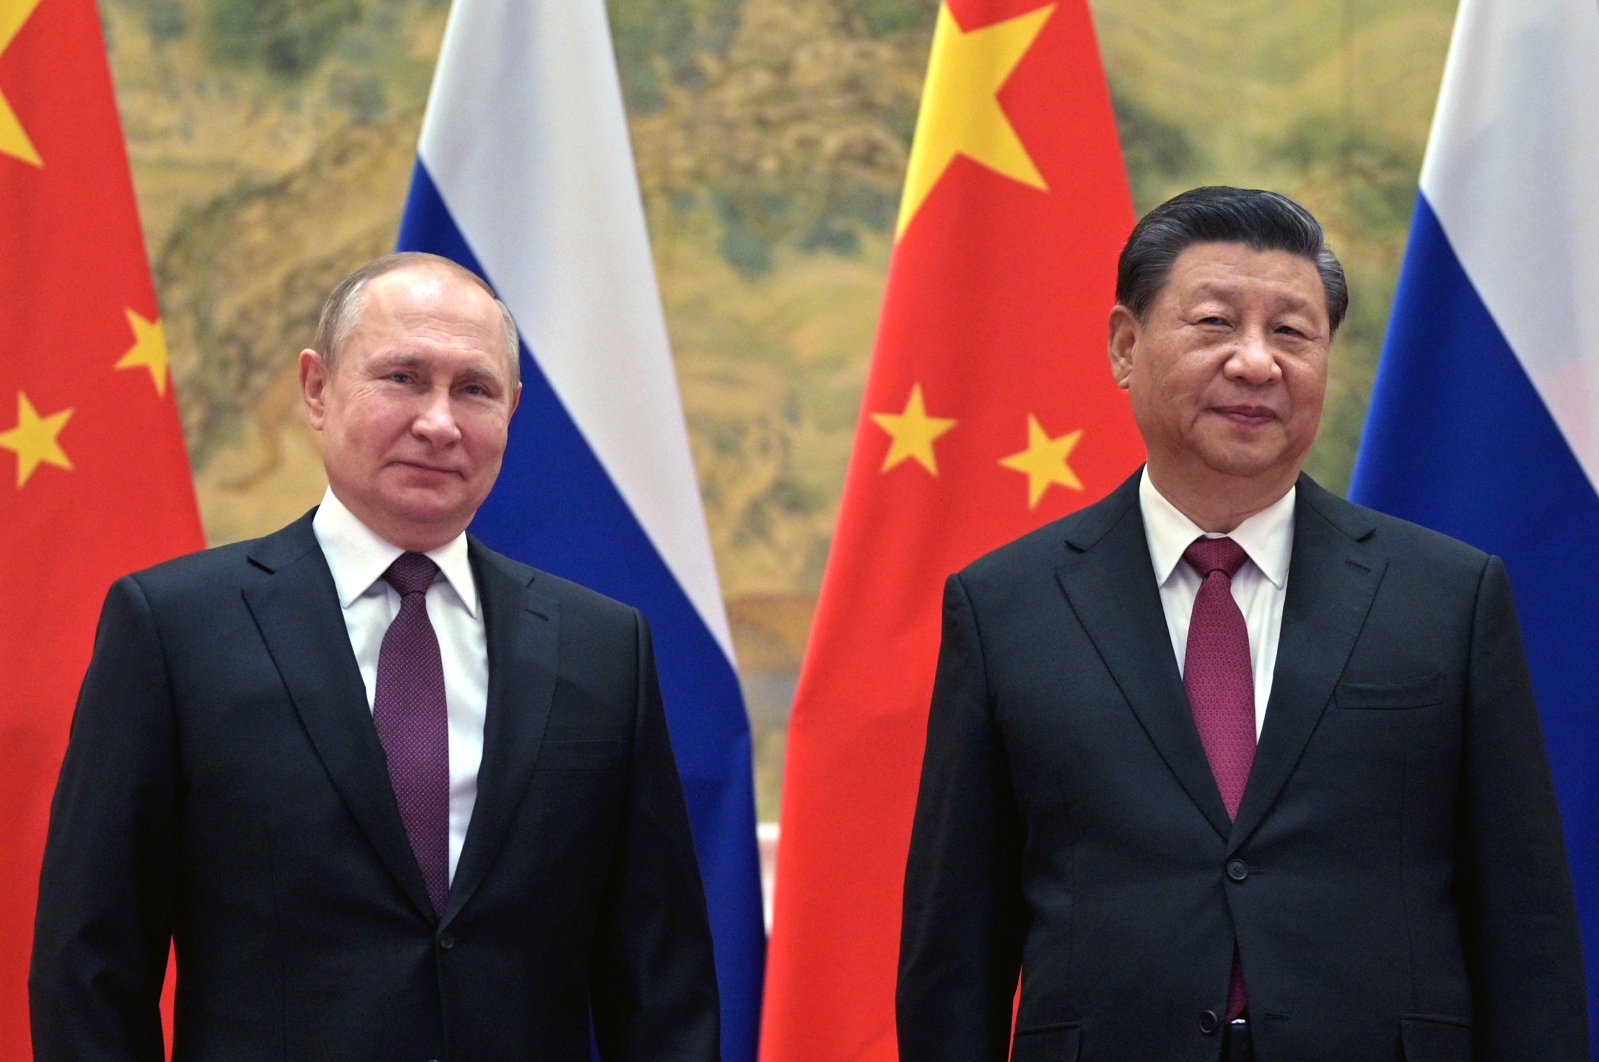 Chinese President Xi Jinping (R) and Russian President Vladimir Putin pose for a photo prior to their talks in Beijing, China, Feb. 4, 2022. (AP Photo)